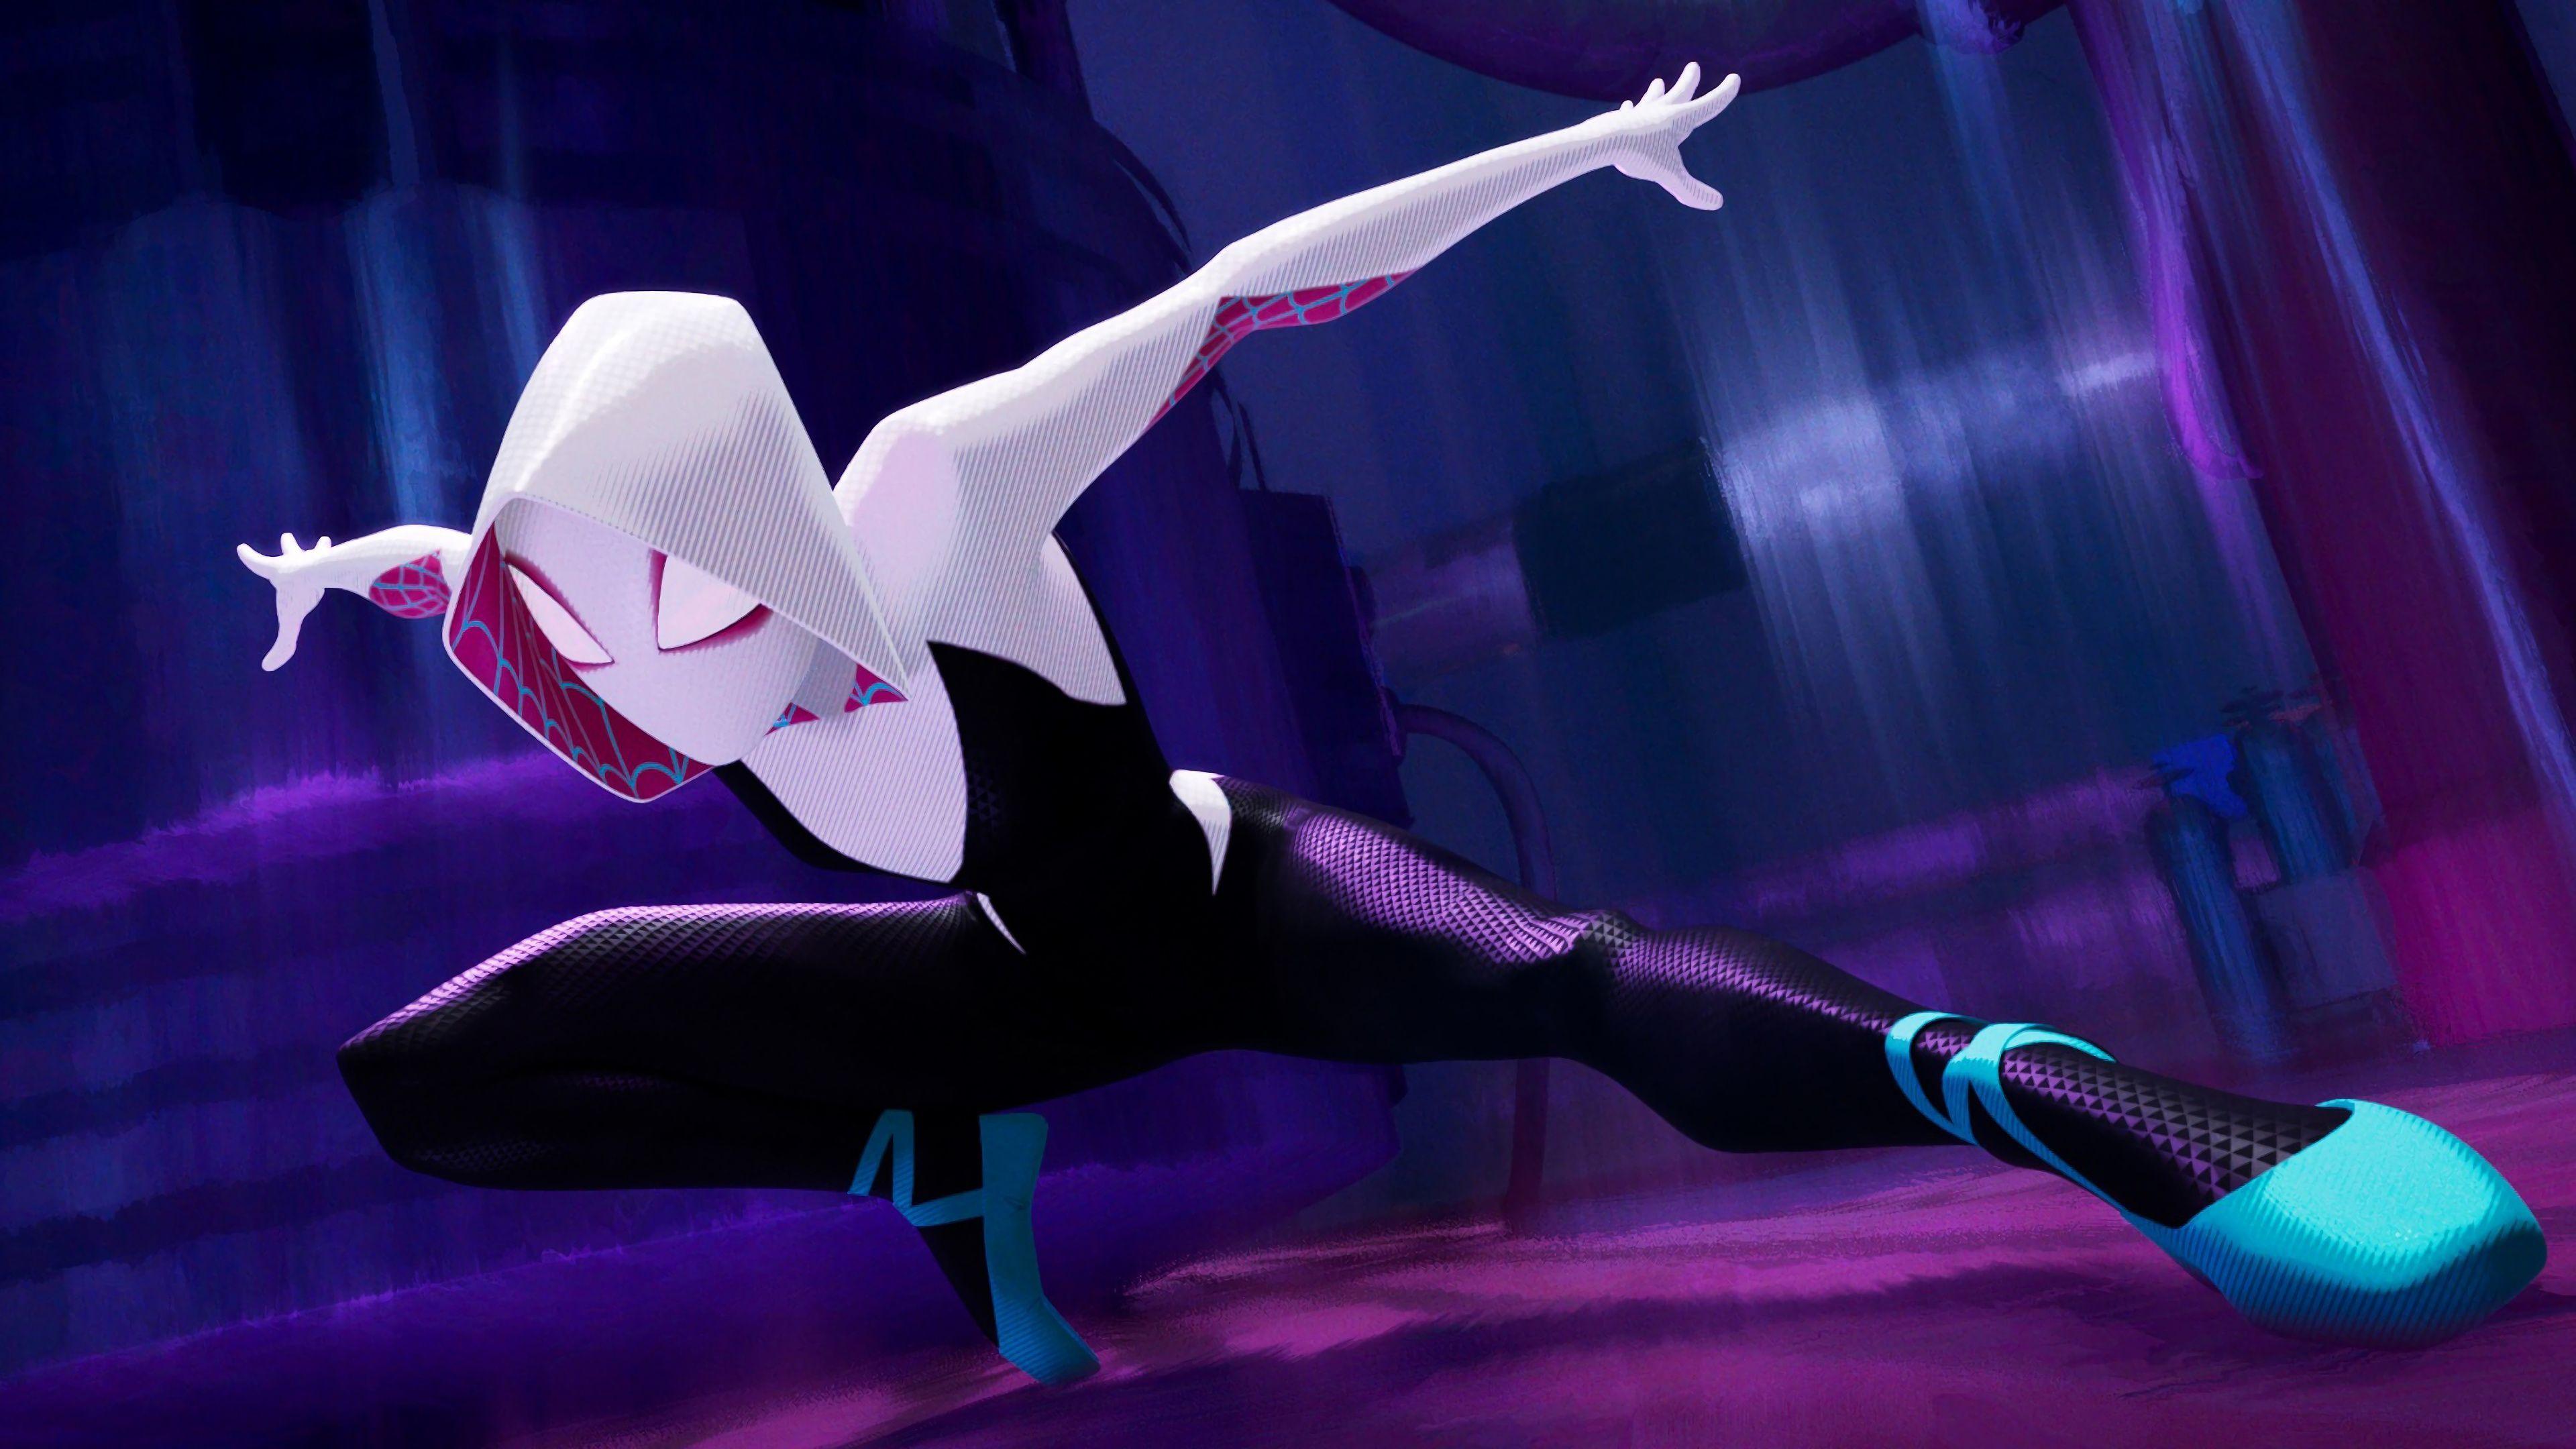 Into The Spider Verse Gwen Stacy Wallpapers - Wallpaper Cave